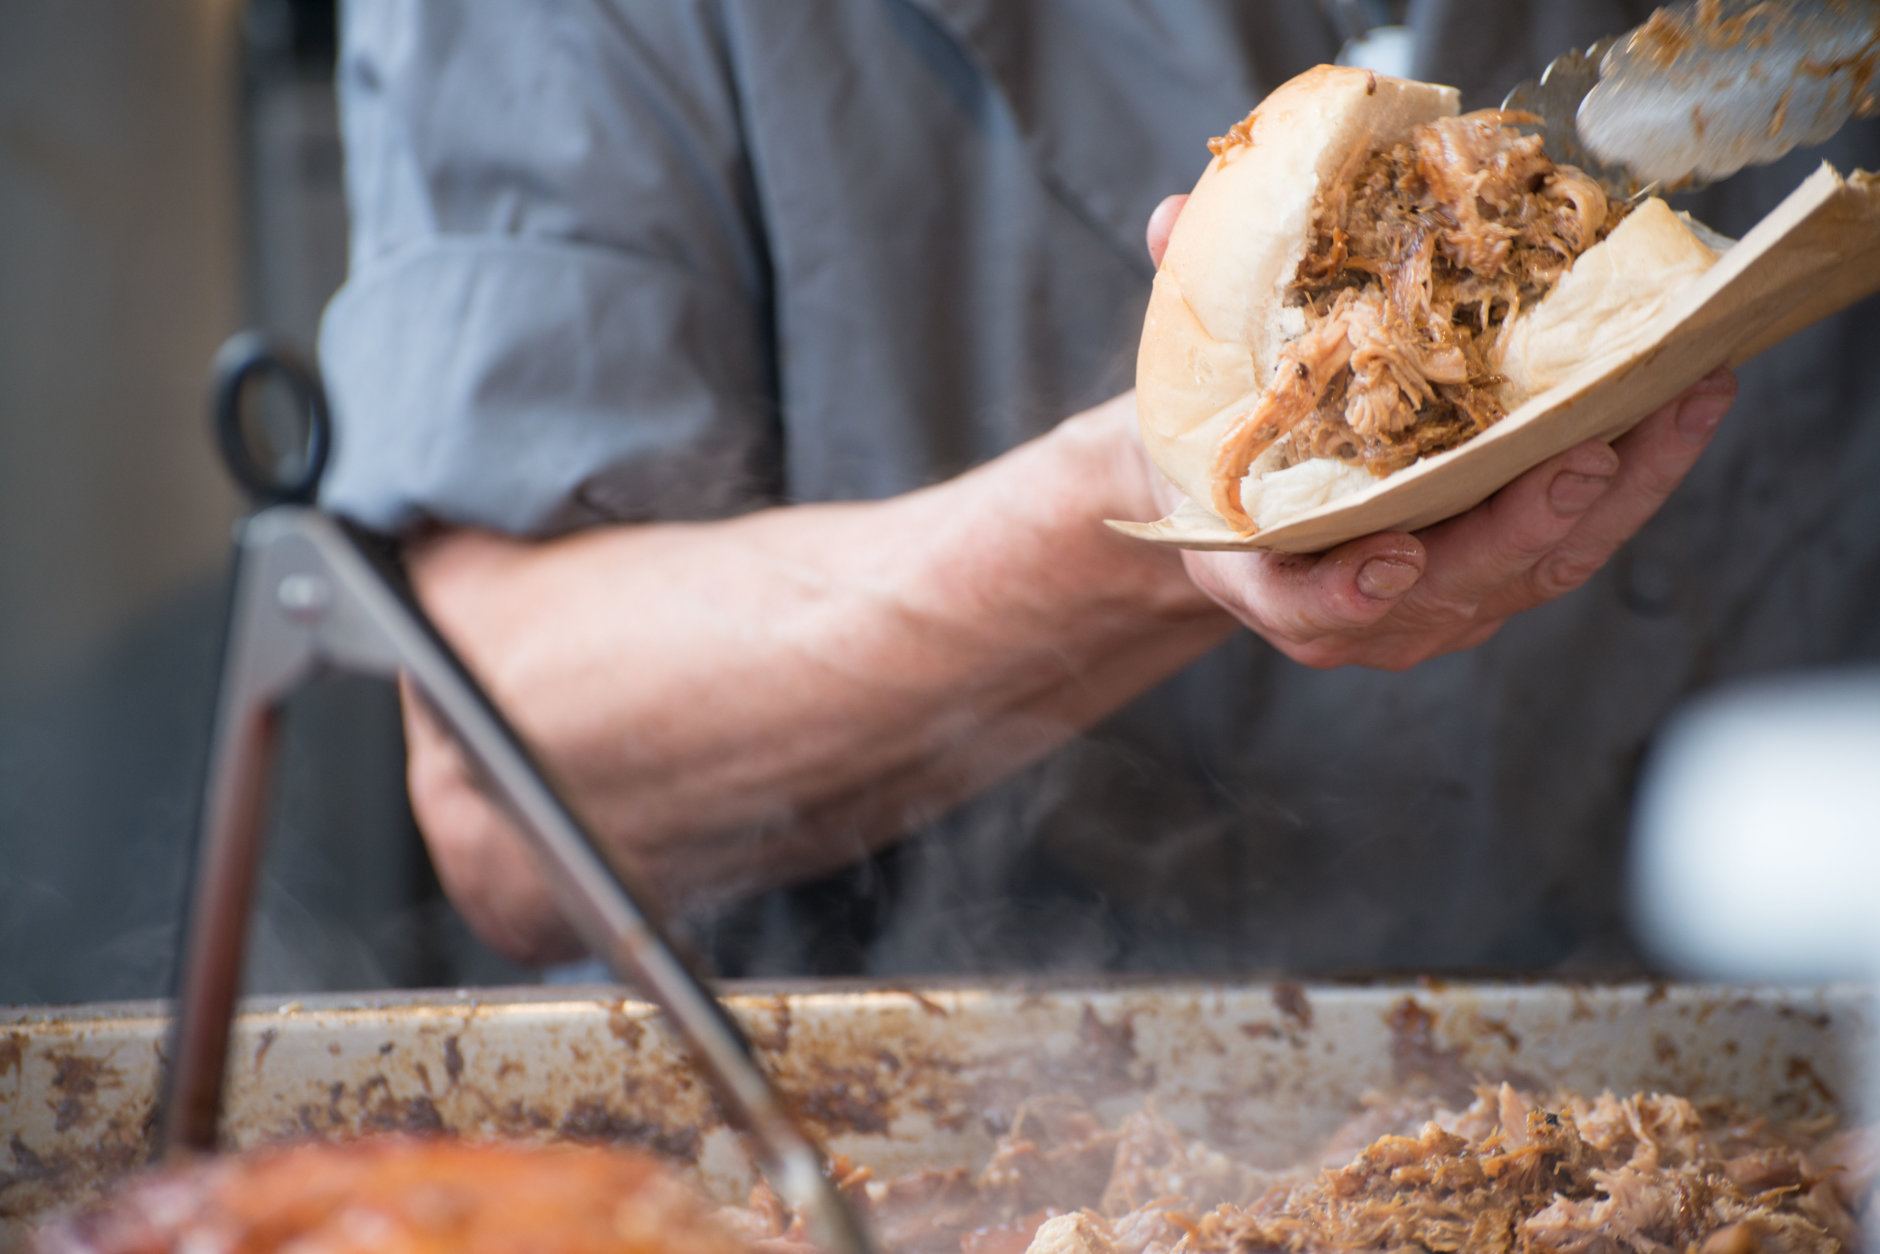 Man in grey T shirt serving pulled pork street food holding sandwich with rind and serving tongs in the foreground